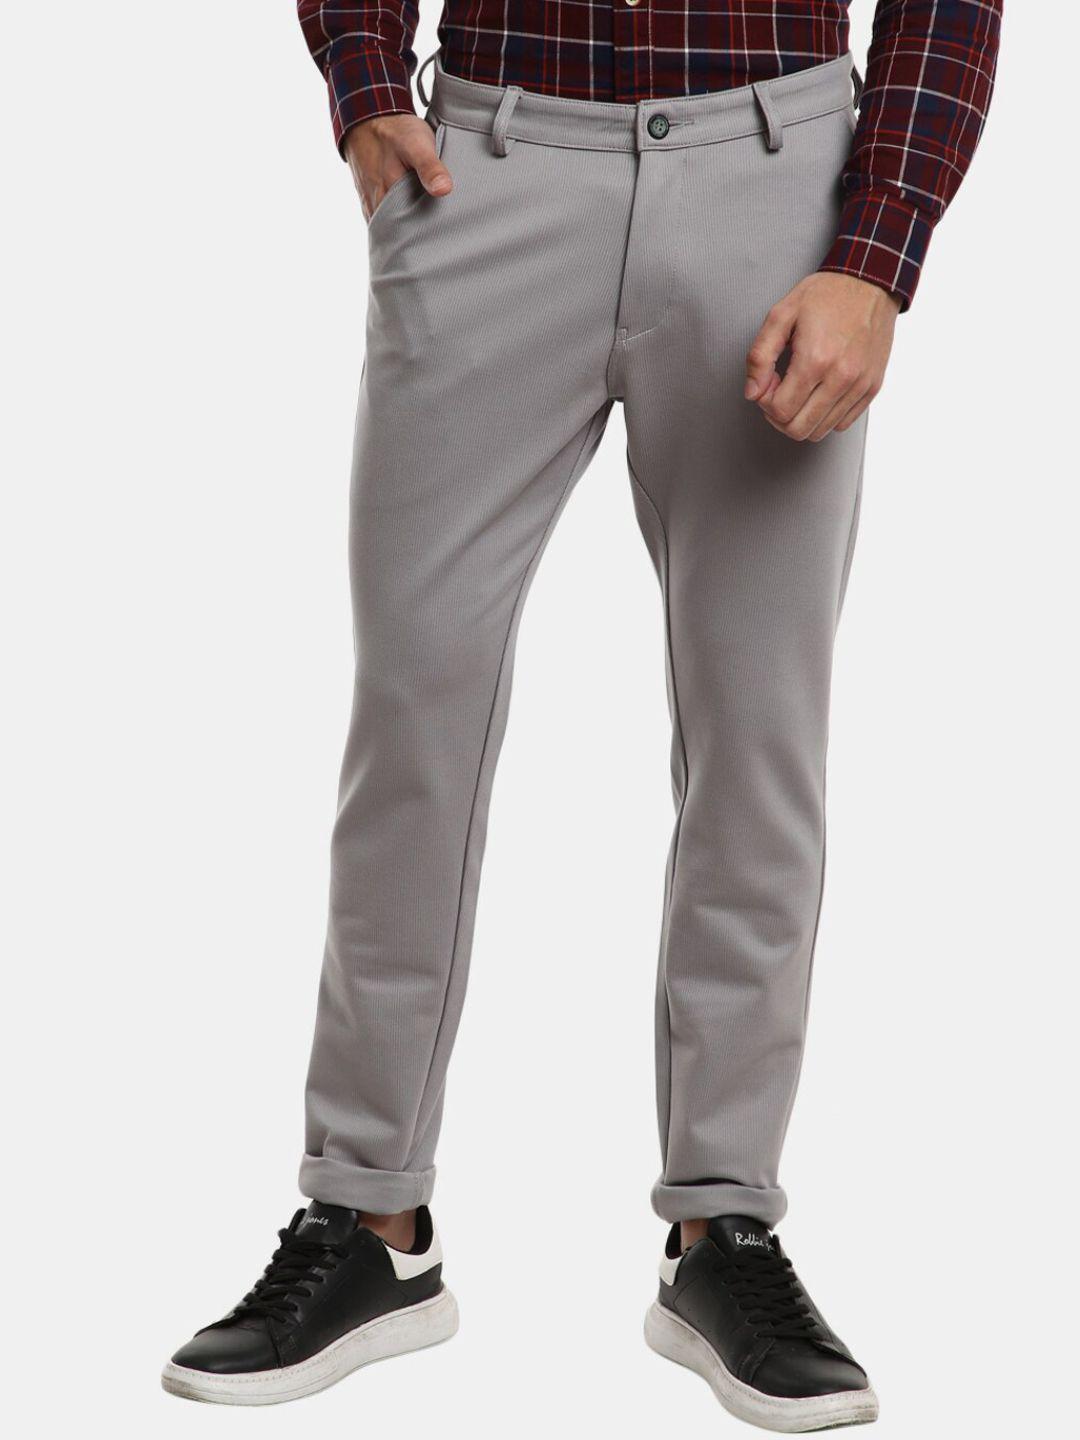 v-mart men grey classic slim fit cotton chinos trousers